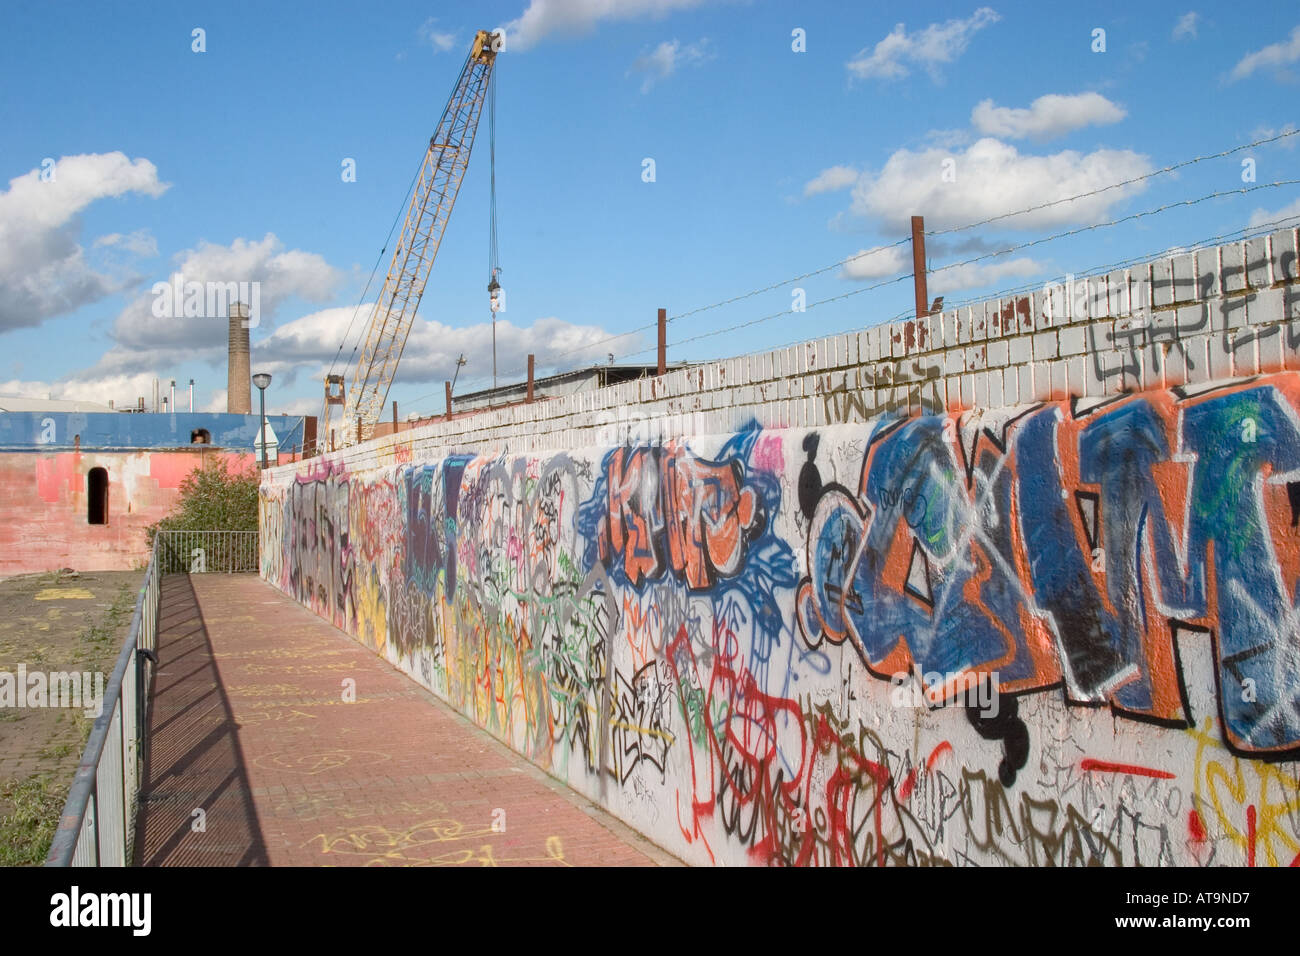 Industrial waterfront with colourful graffiti barbed wire and crane. Thames Path, North Greenwich, London, England Stock Photo